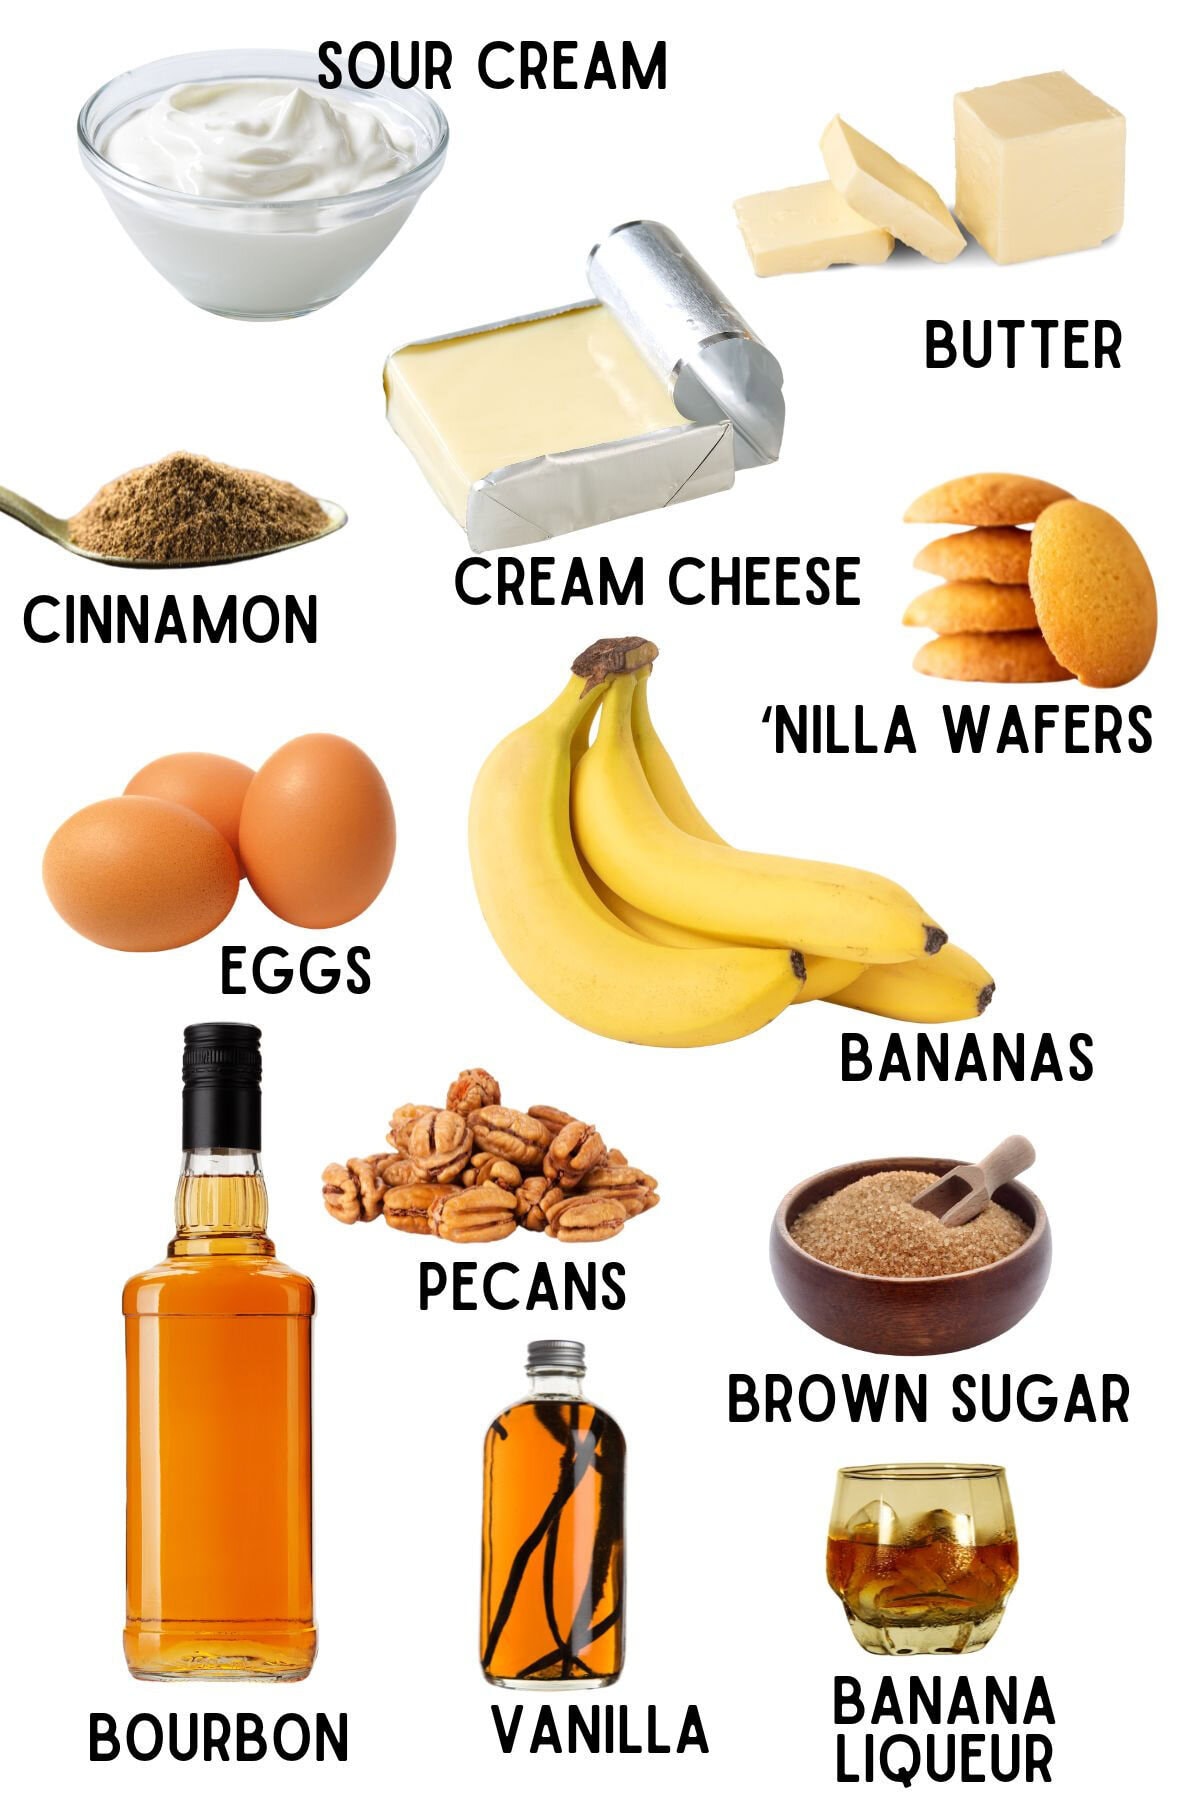 Labeled ingredients for this bananas foster cheesecake recipe.